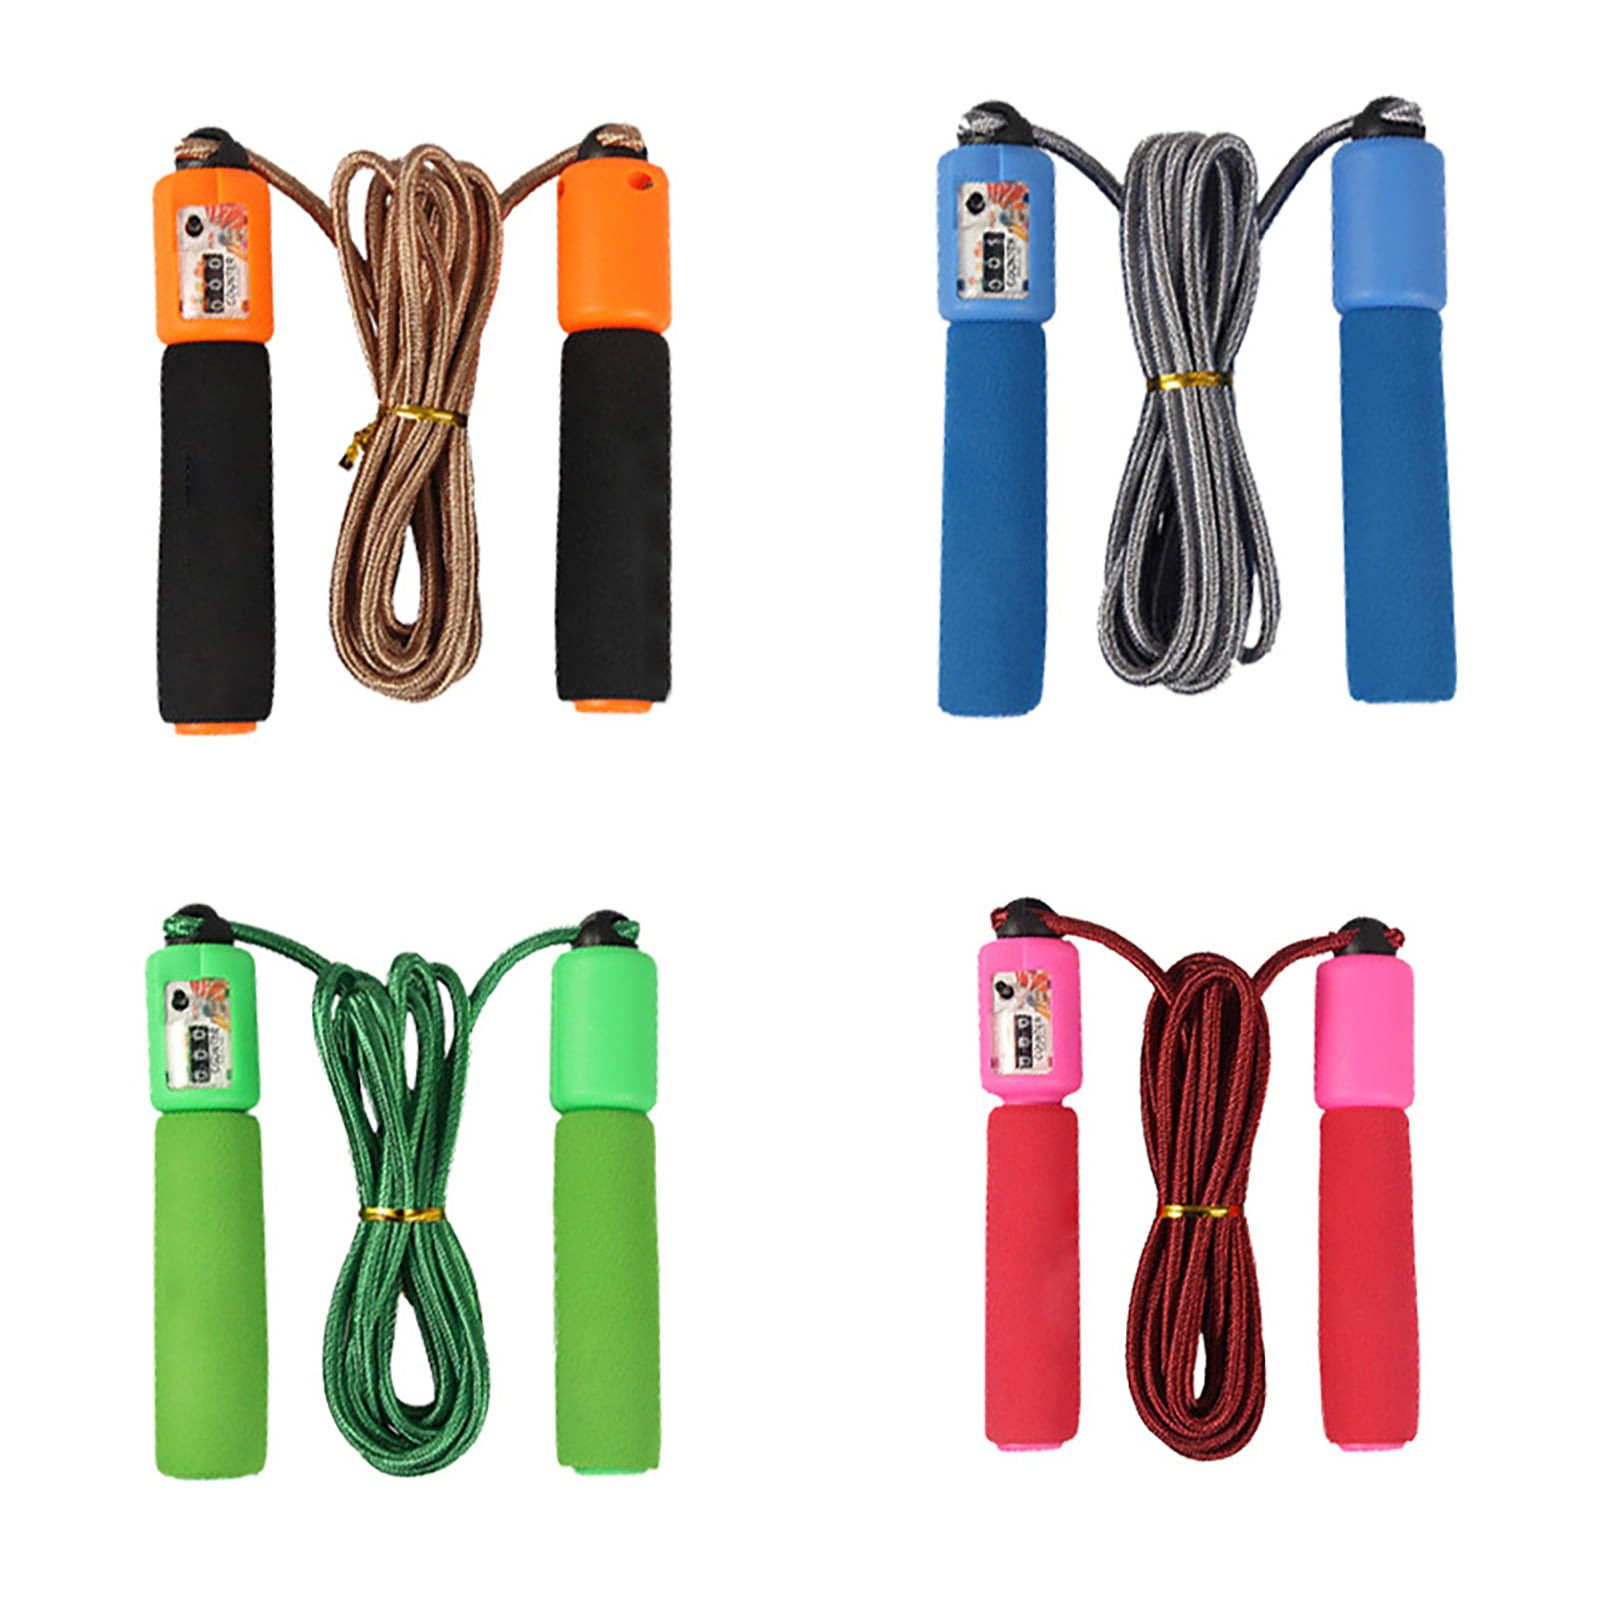 Details about   9ft Adjustable Jump Rope Fitness Training Adult Kids Jumping  ​​Cord 